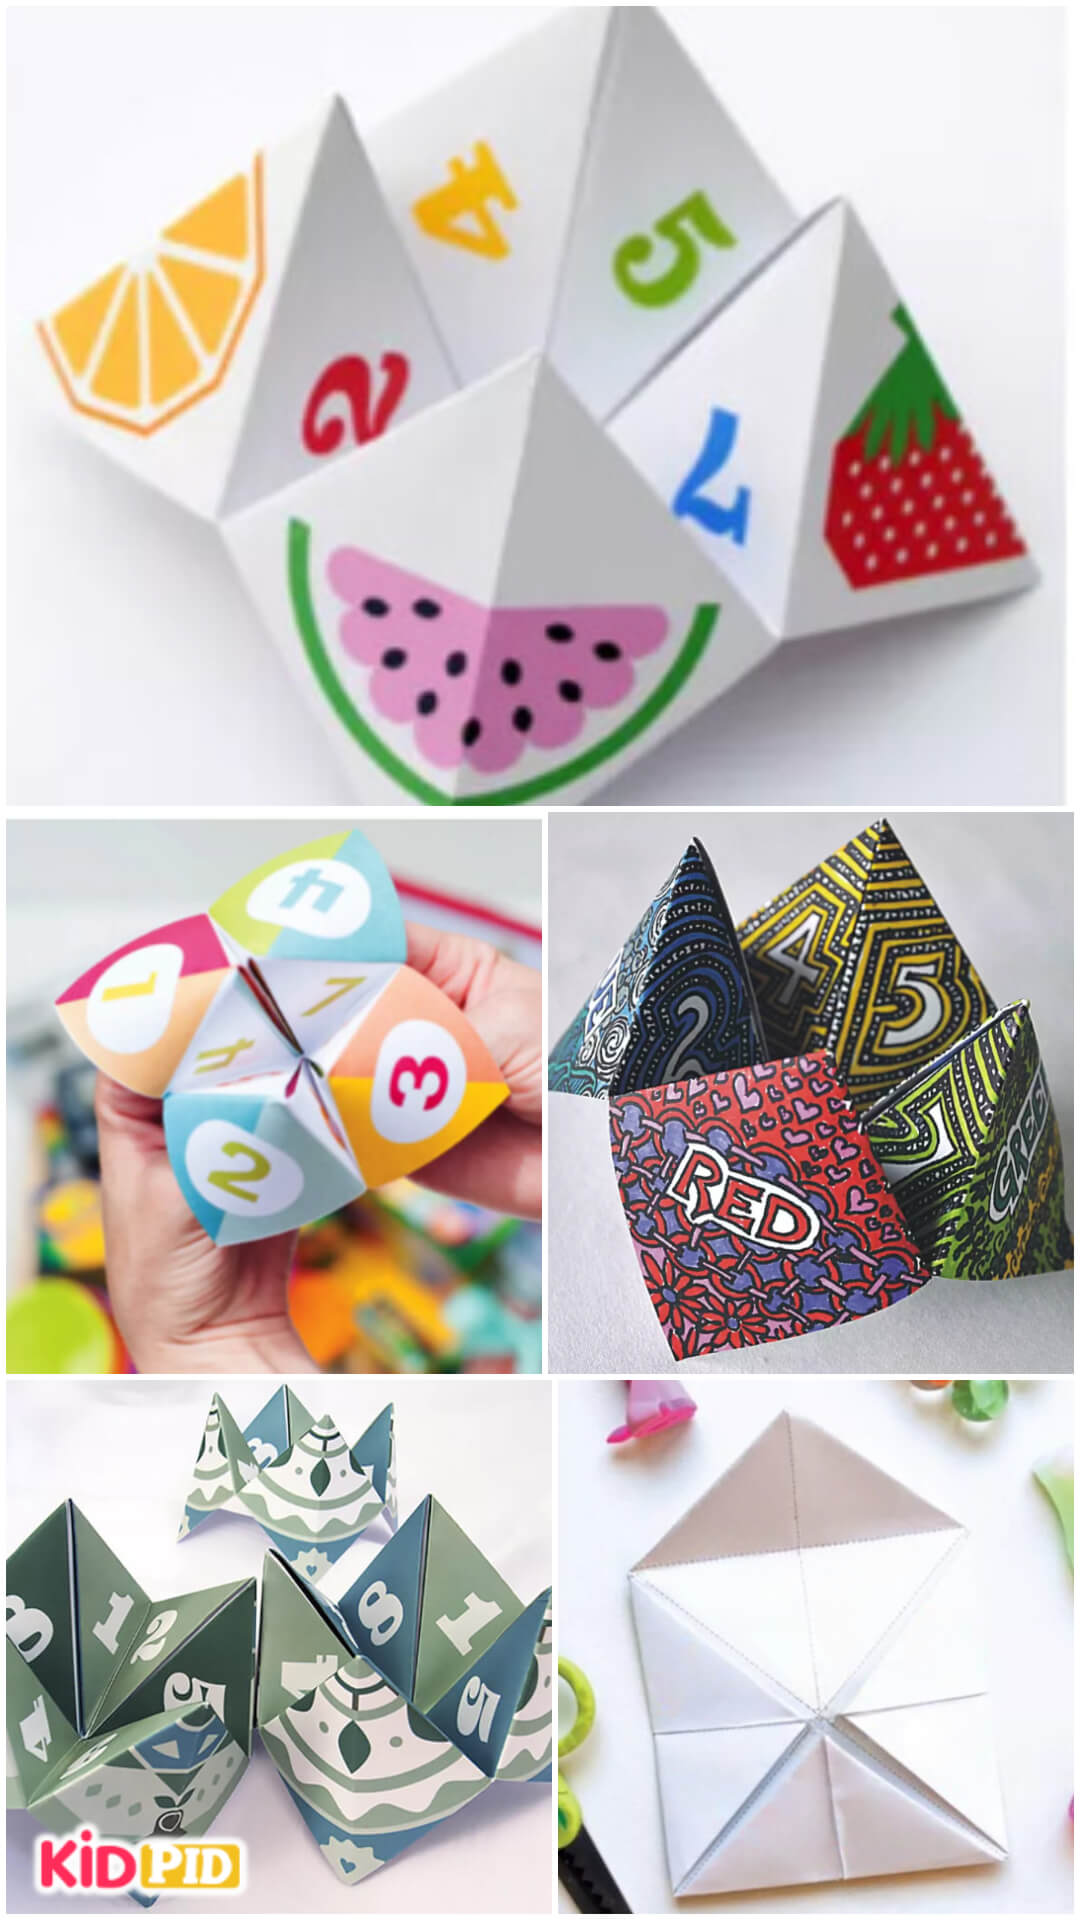 Funny Paper Cootie Catcher Ideas to Play